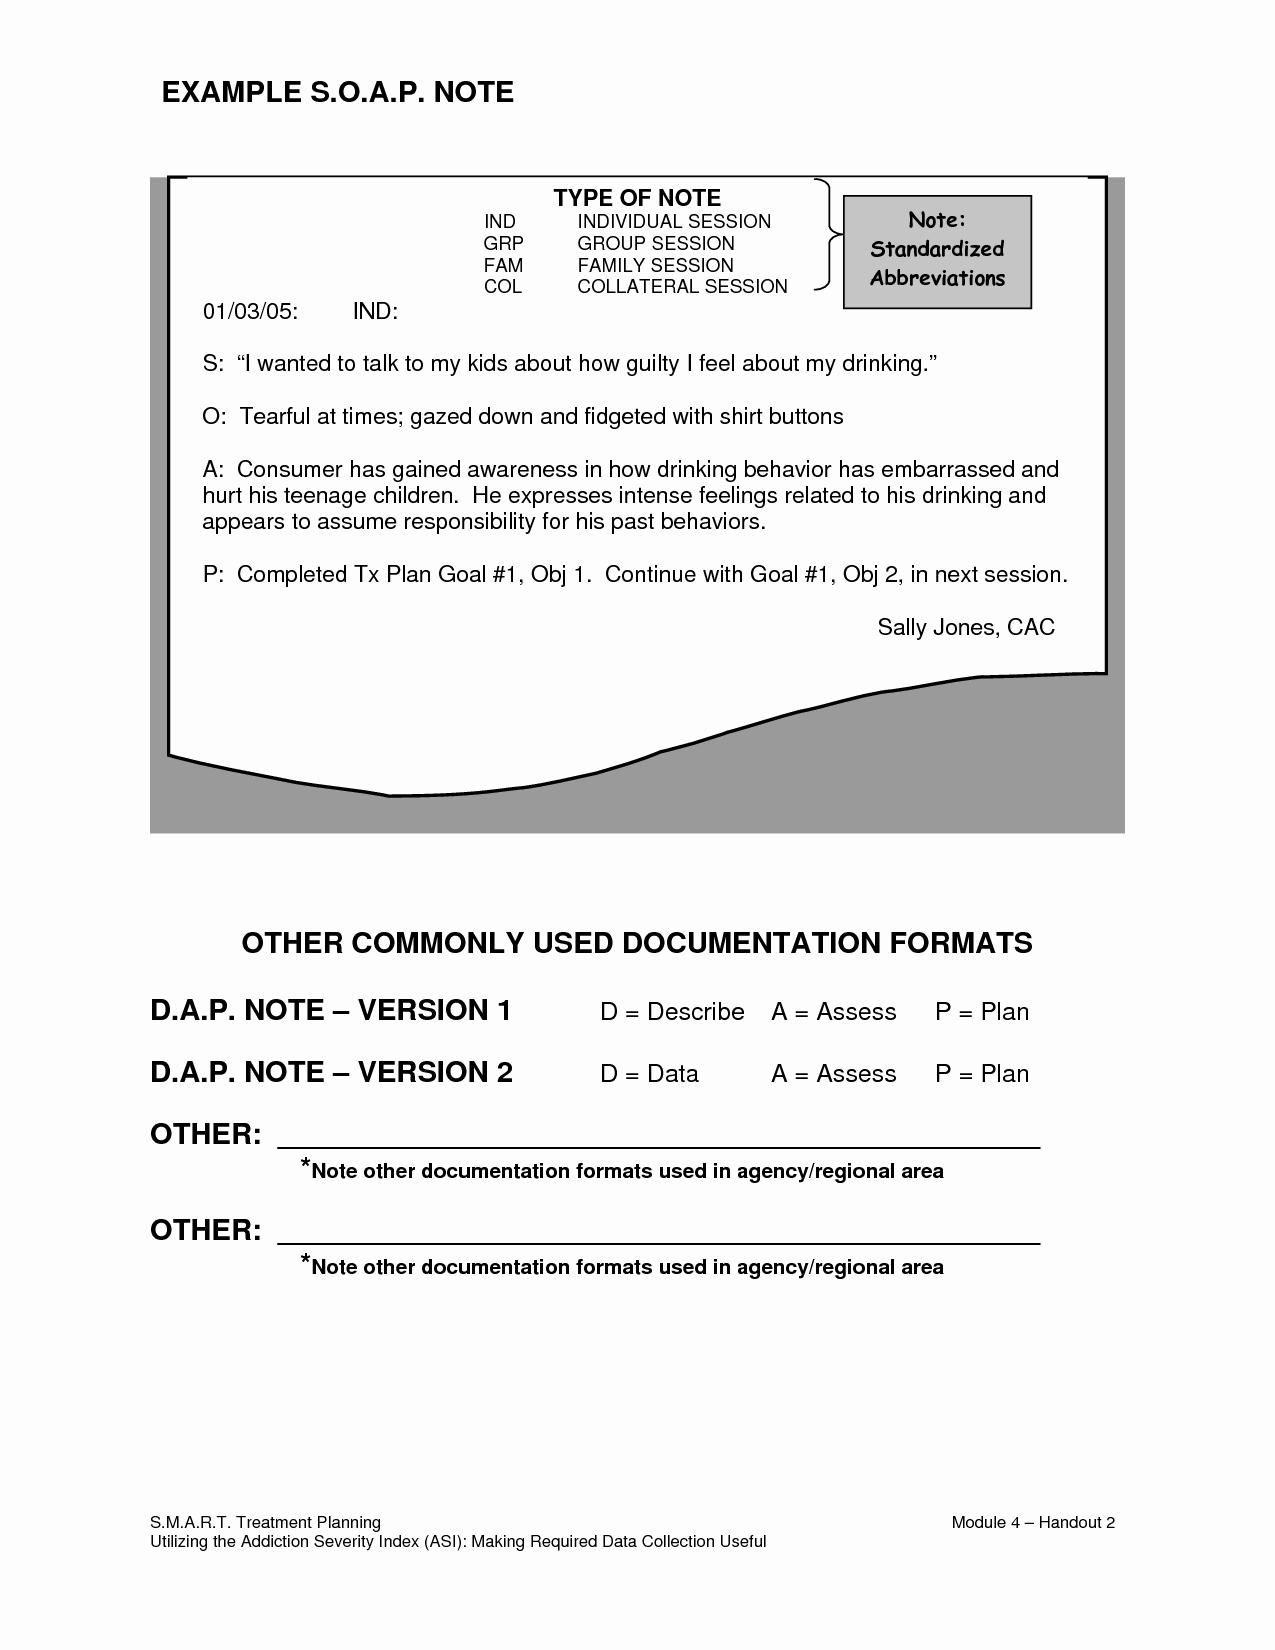 Counseling soap Note Template Elegant Counseling soap Note Example …